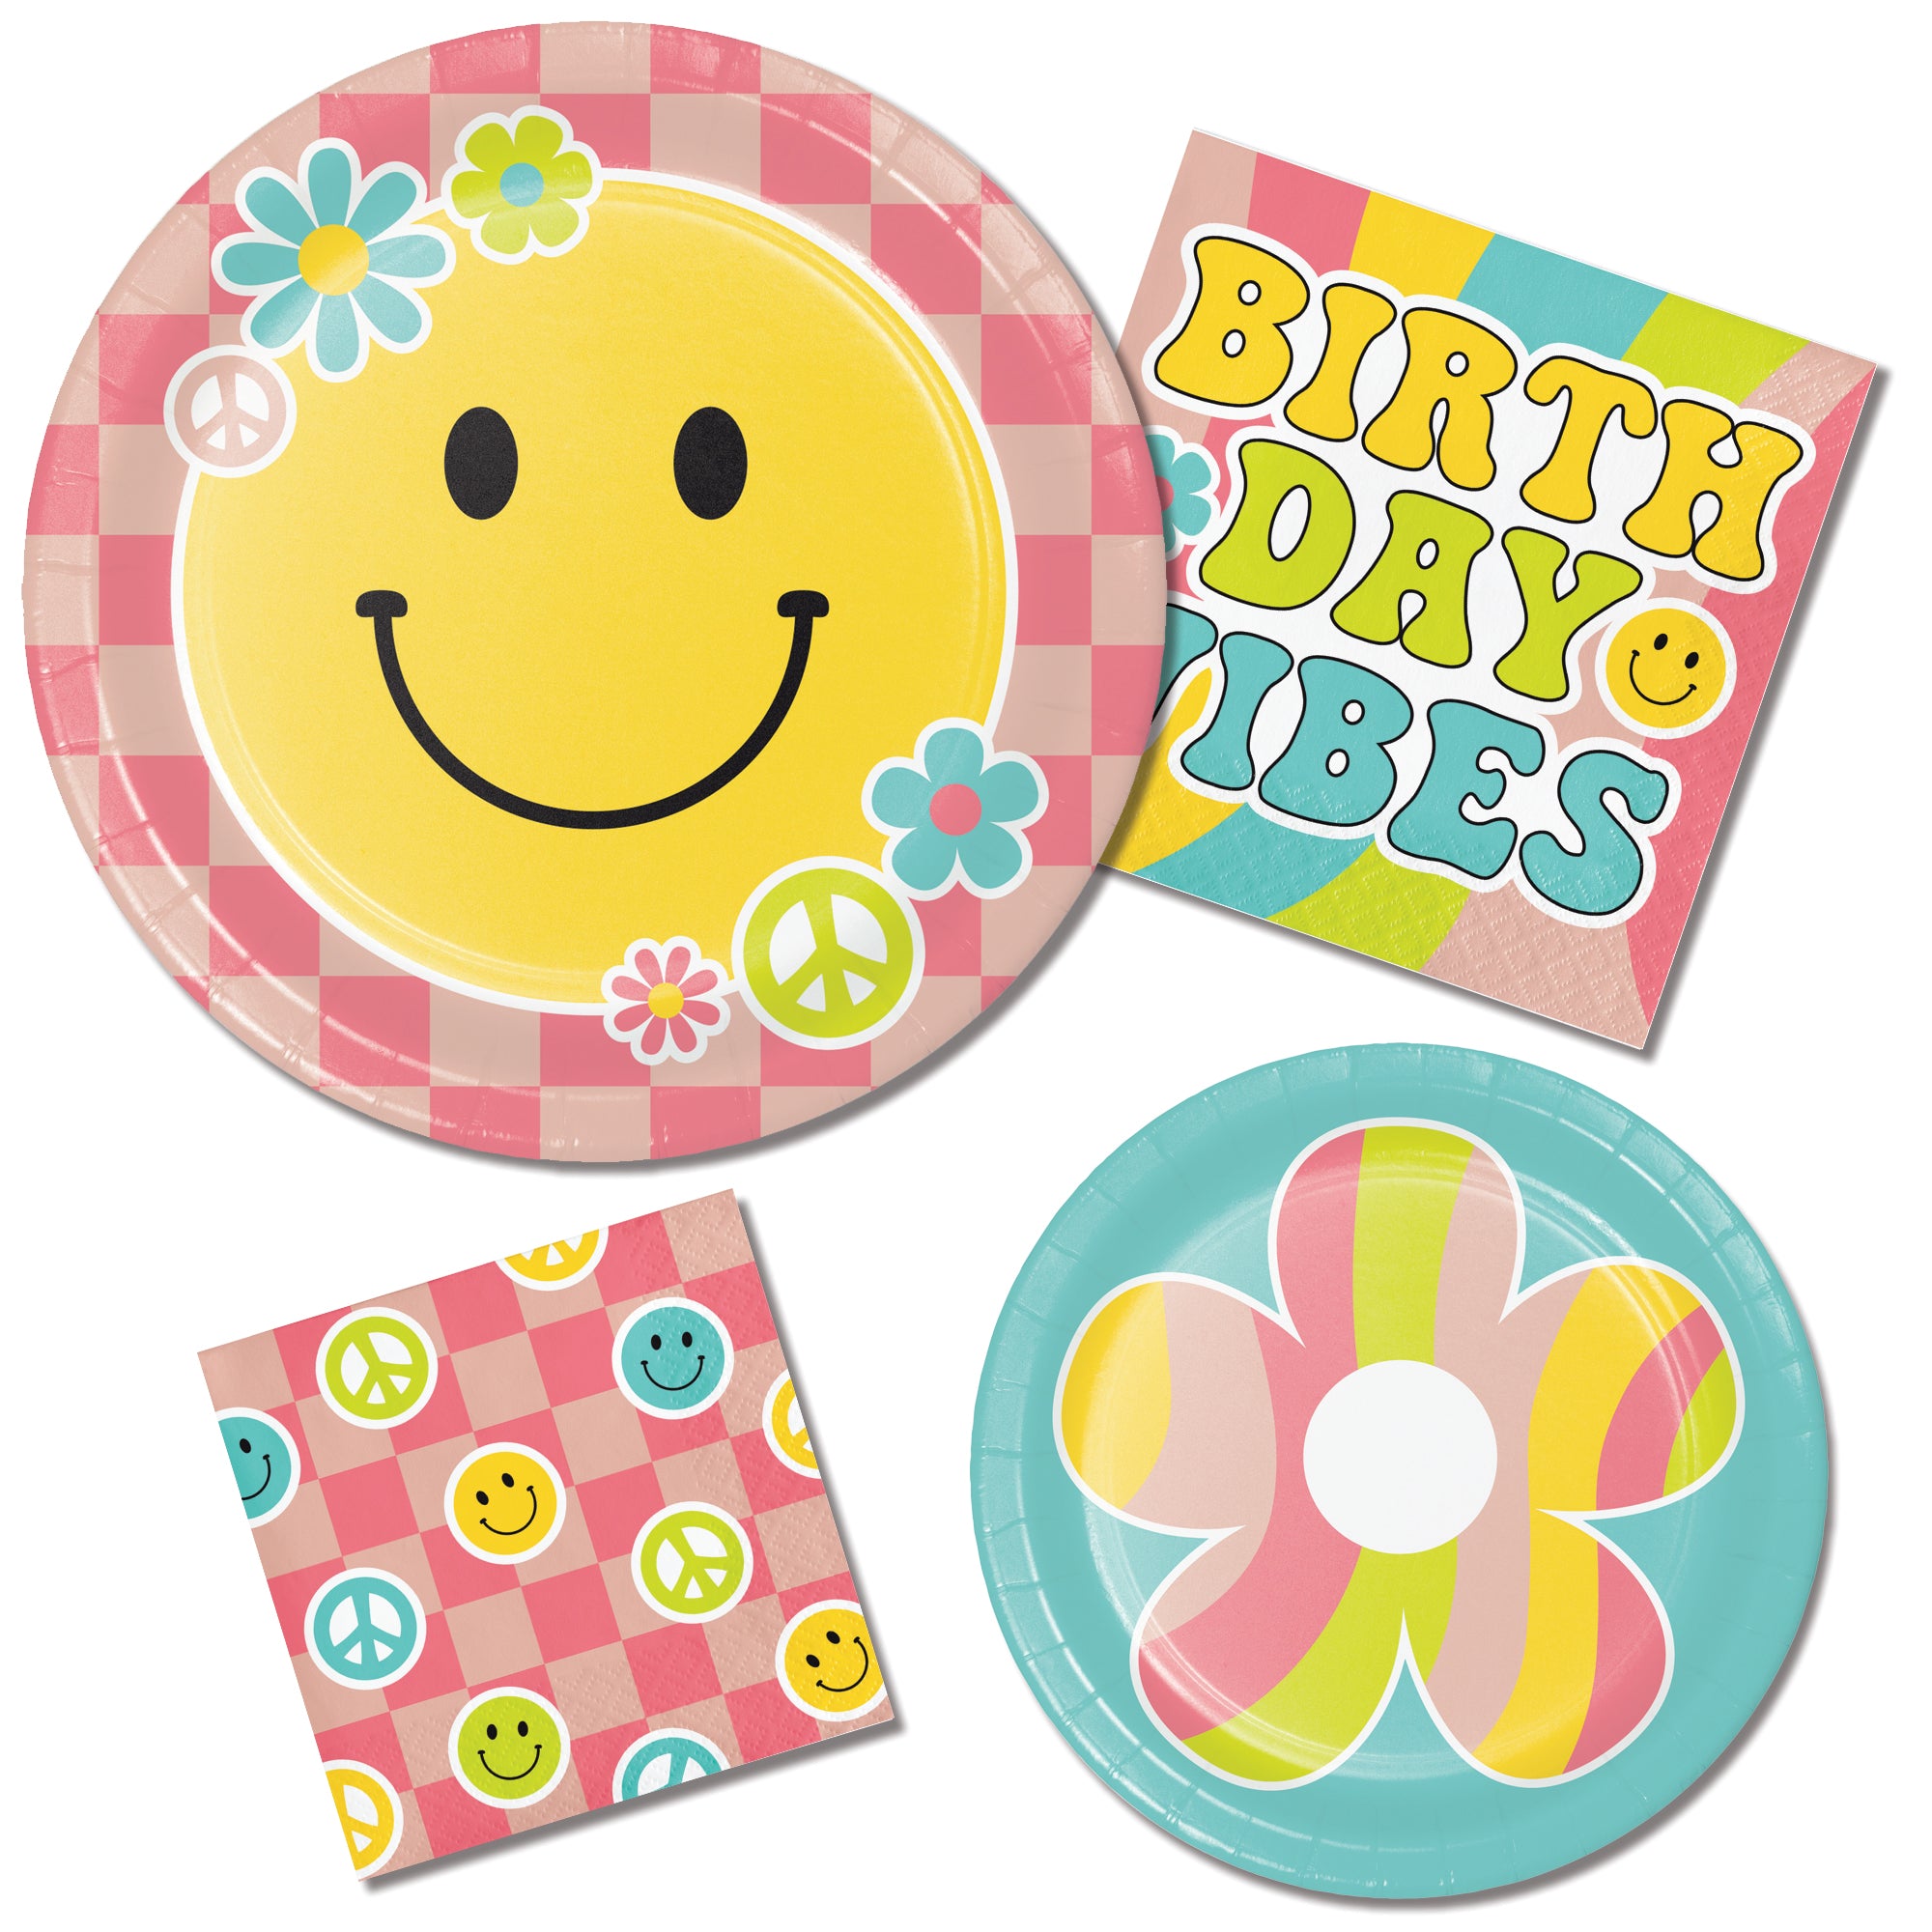 Flower Power Dessert Napkins 16ct | The Party Darling